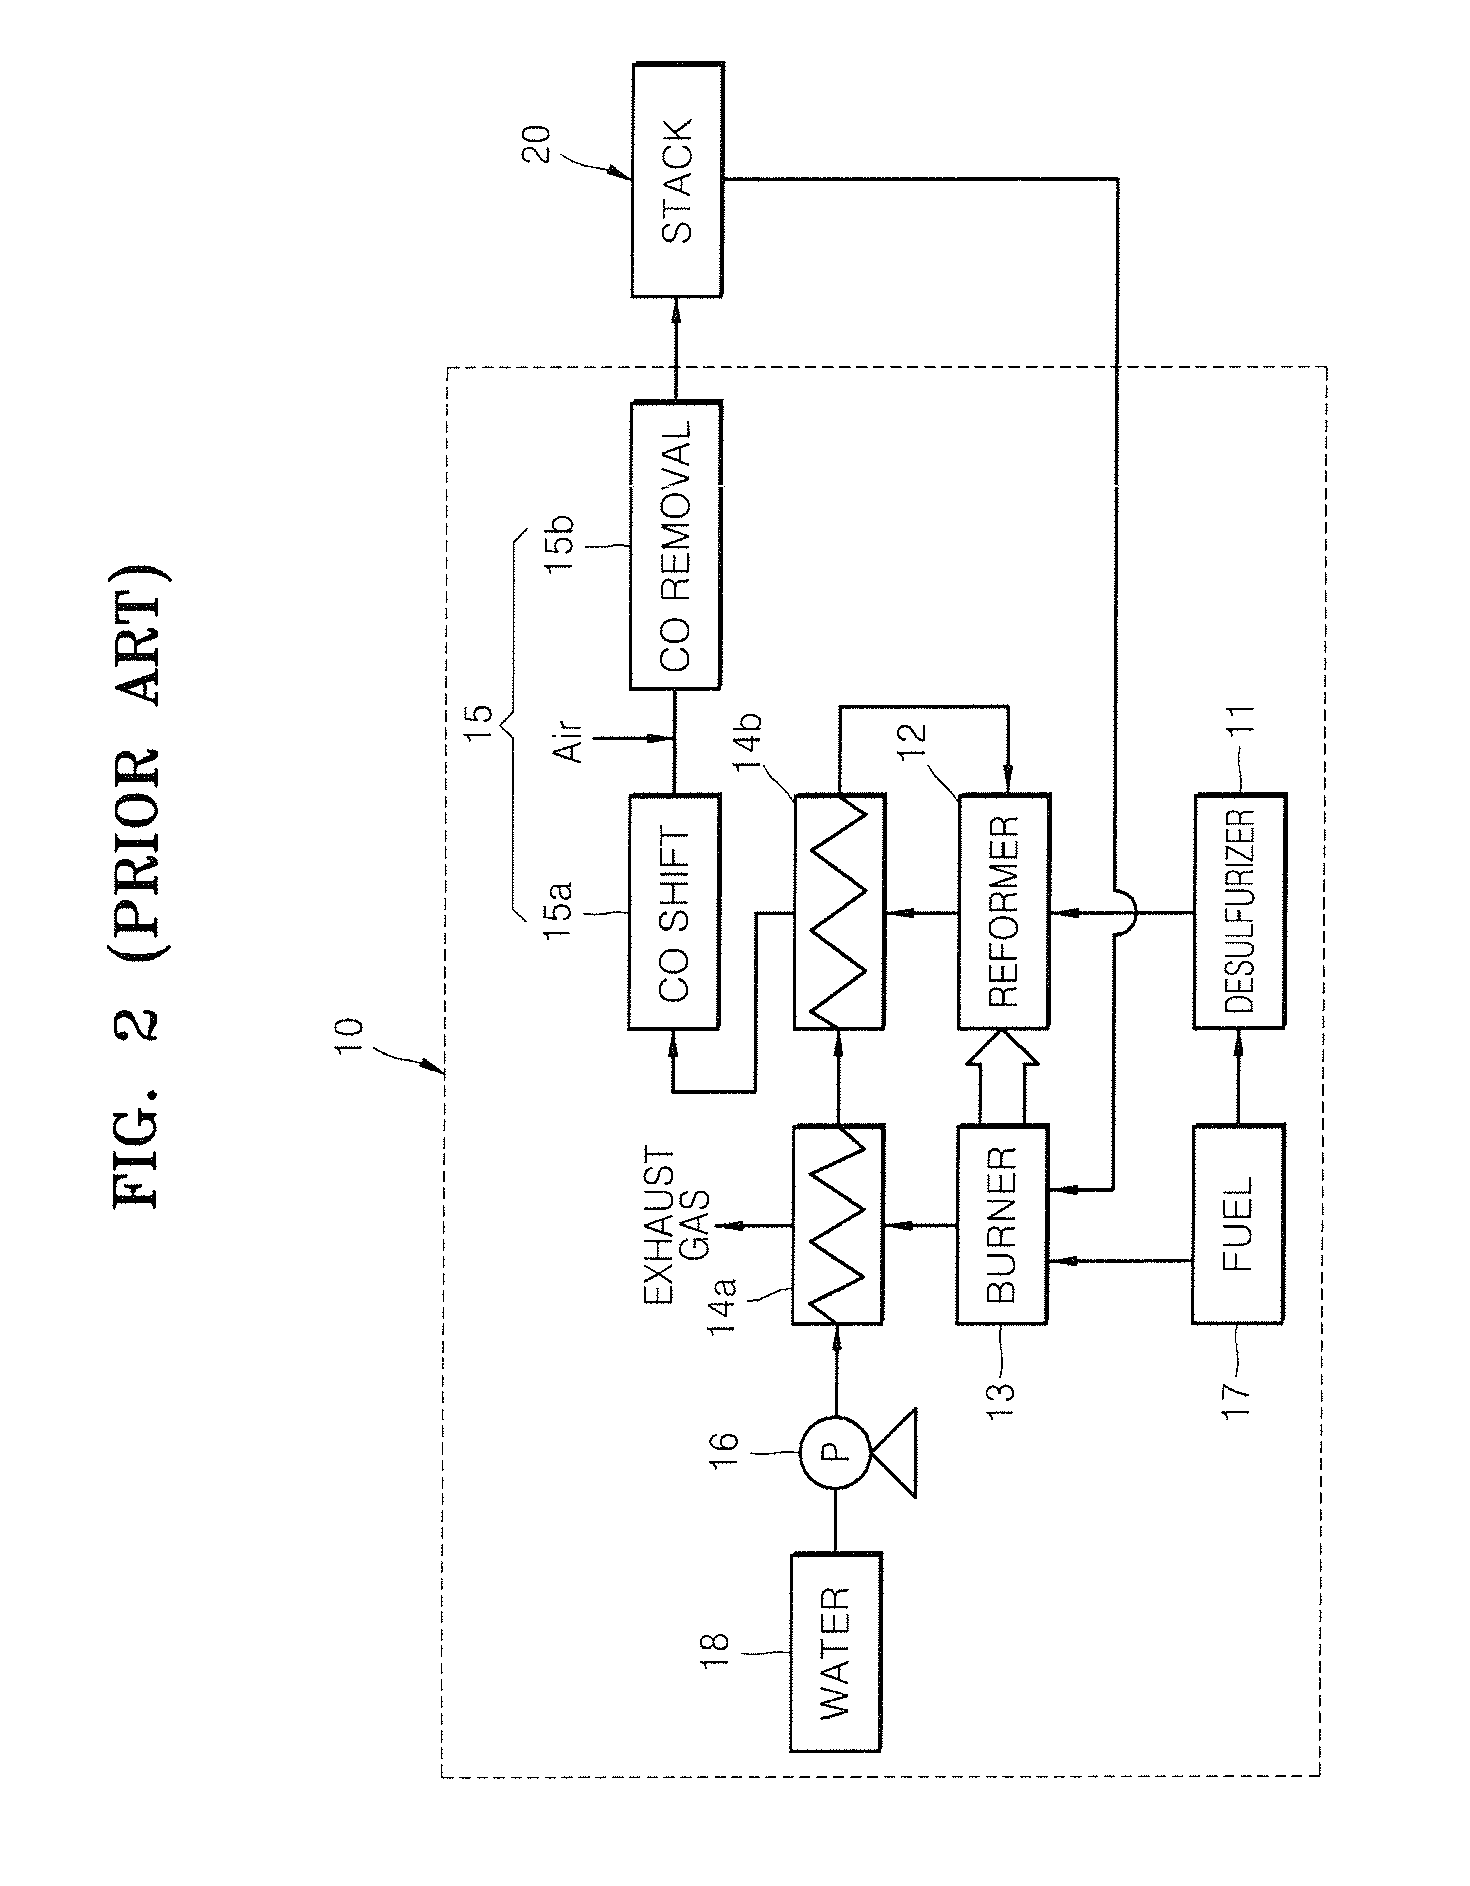 Fuel processor having temperature control function for co shift reactor and method of operating the fuel processor